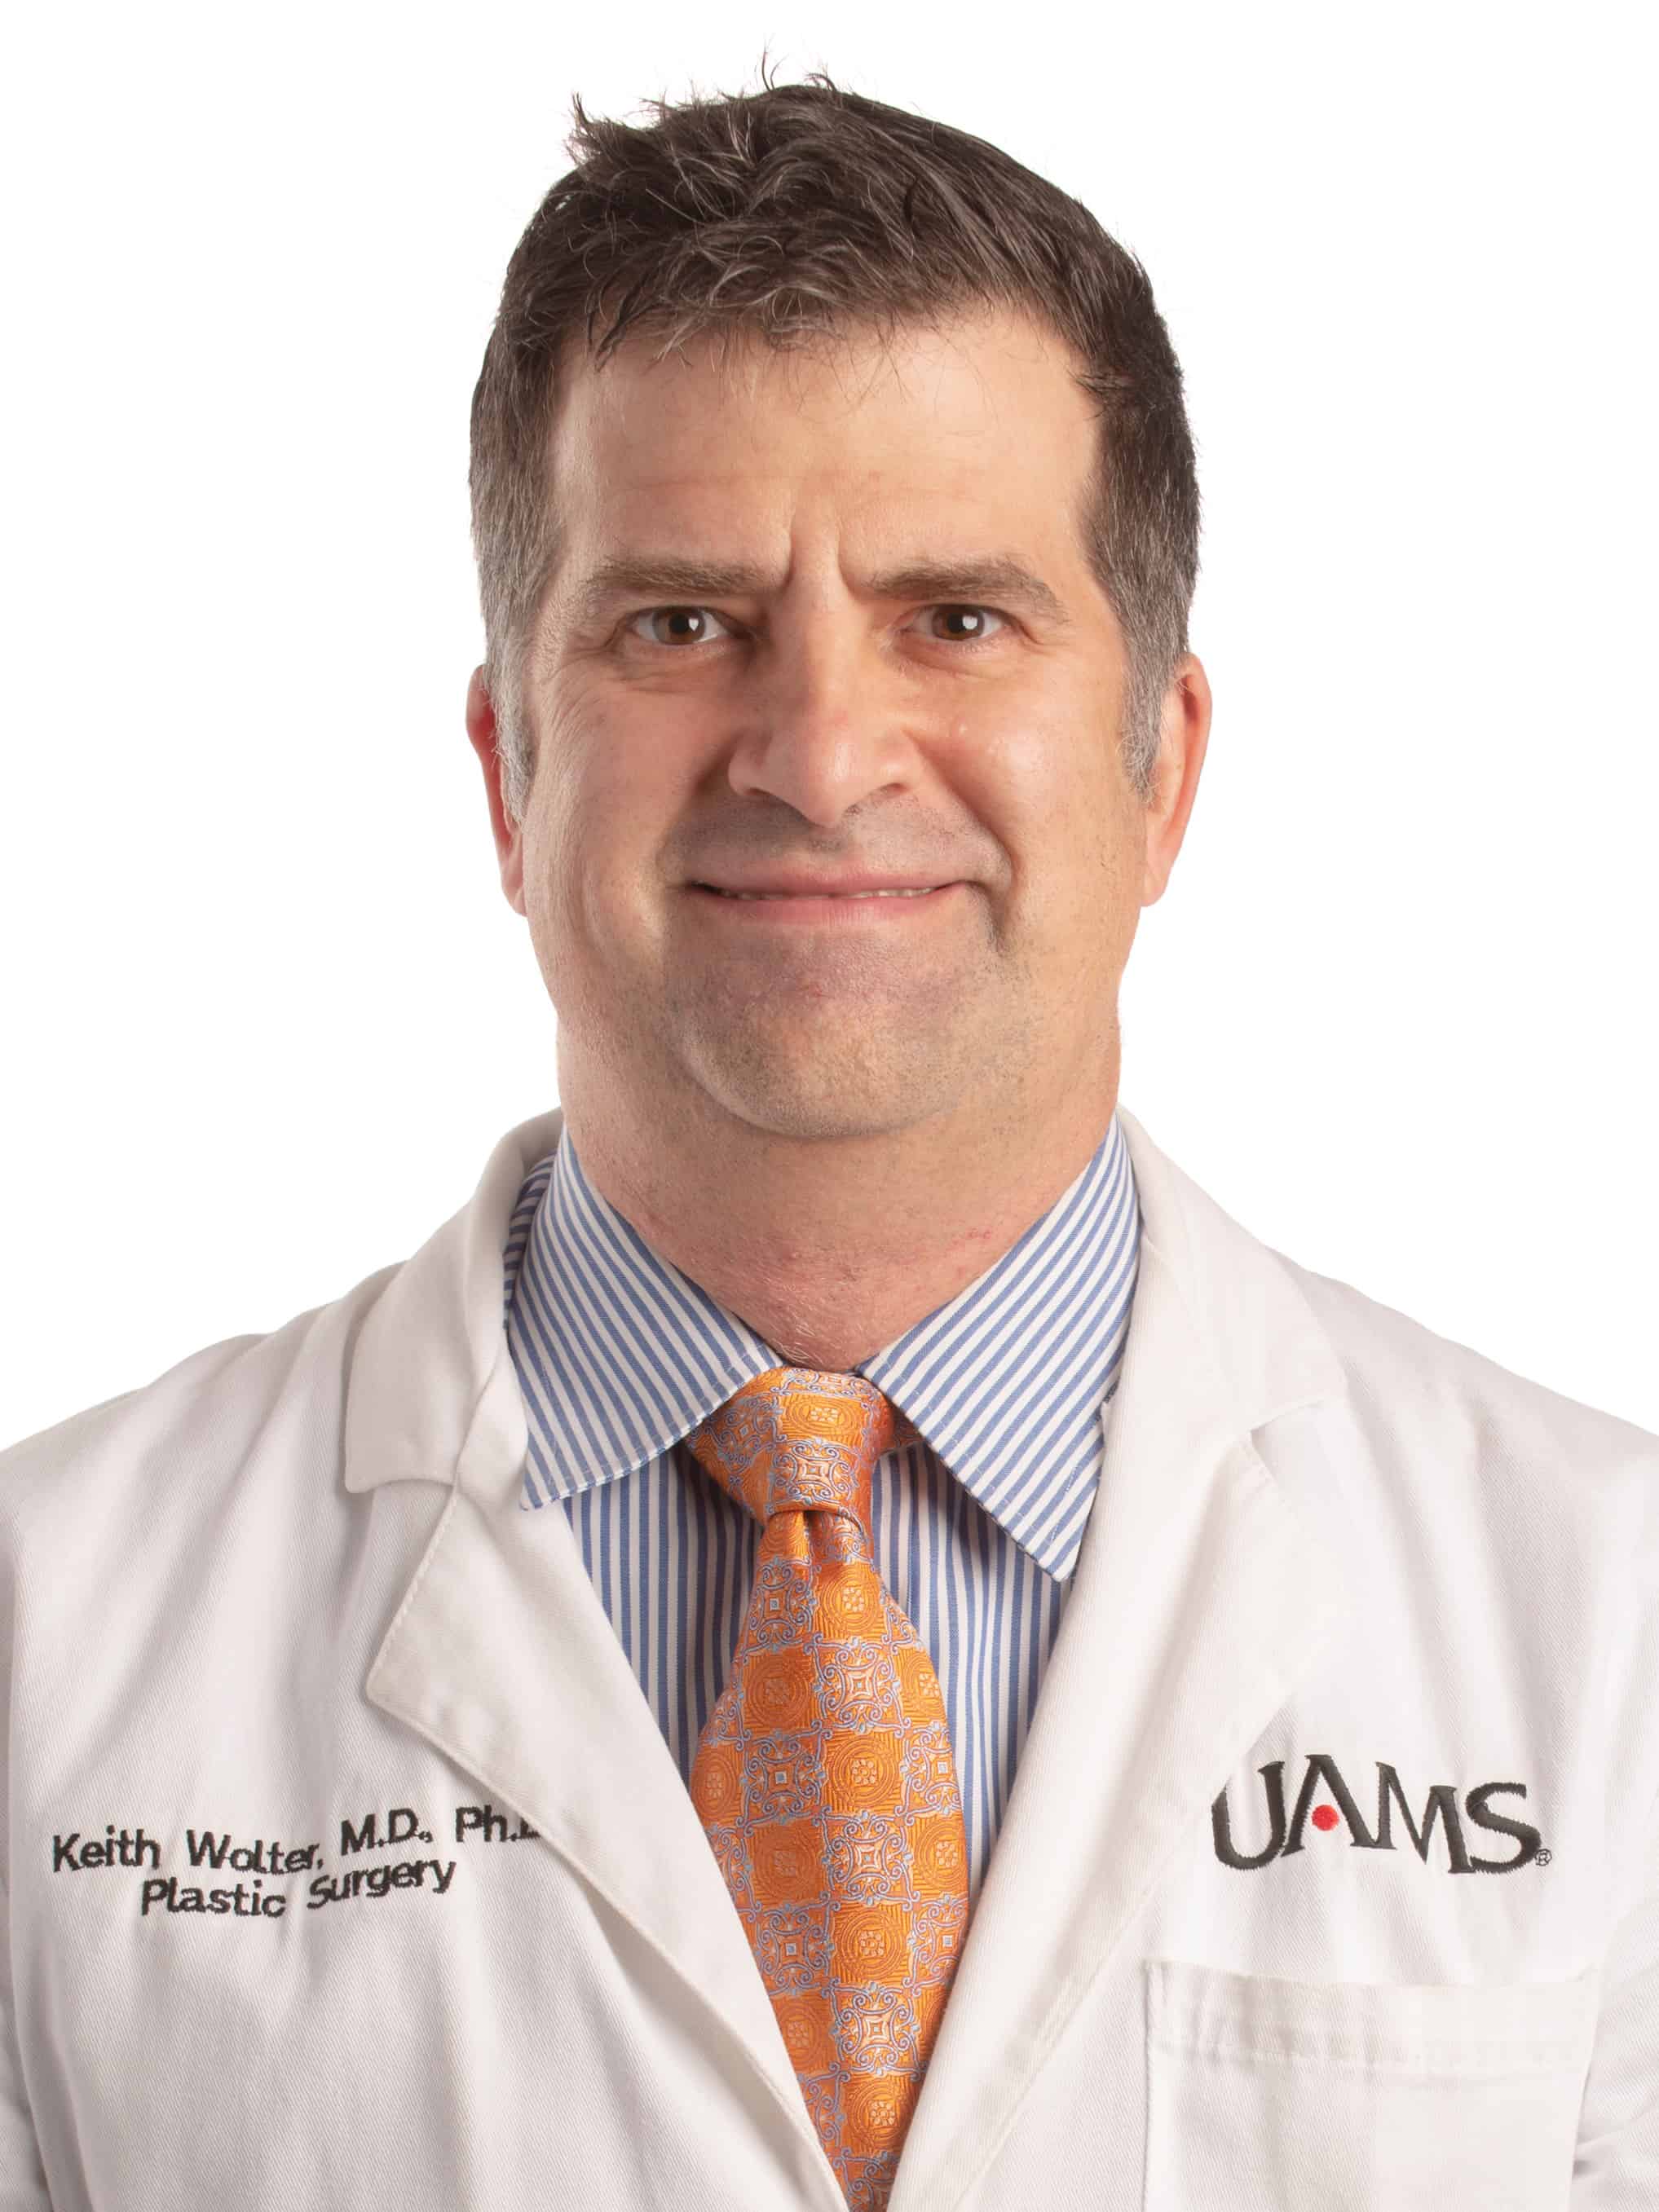 Keith Wolter, M.D., Ph.D.